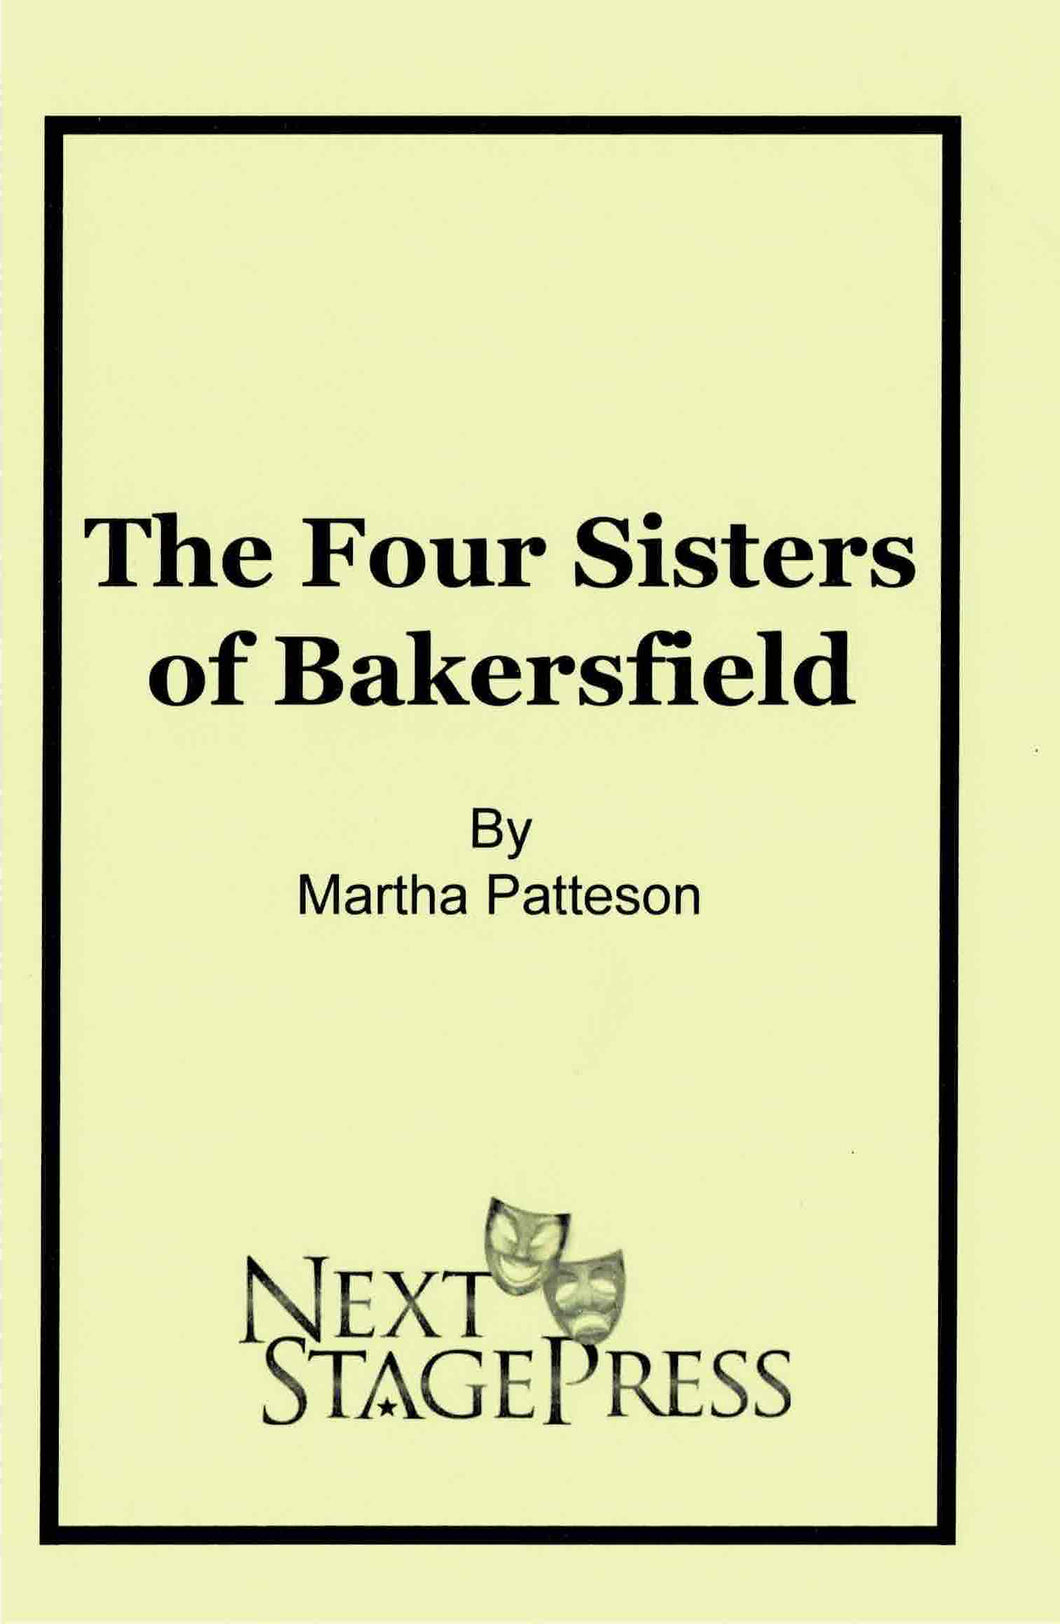 The Four Sisters of Bakersfield - Digital Version